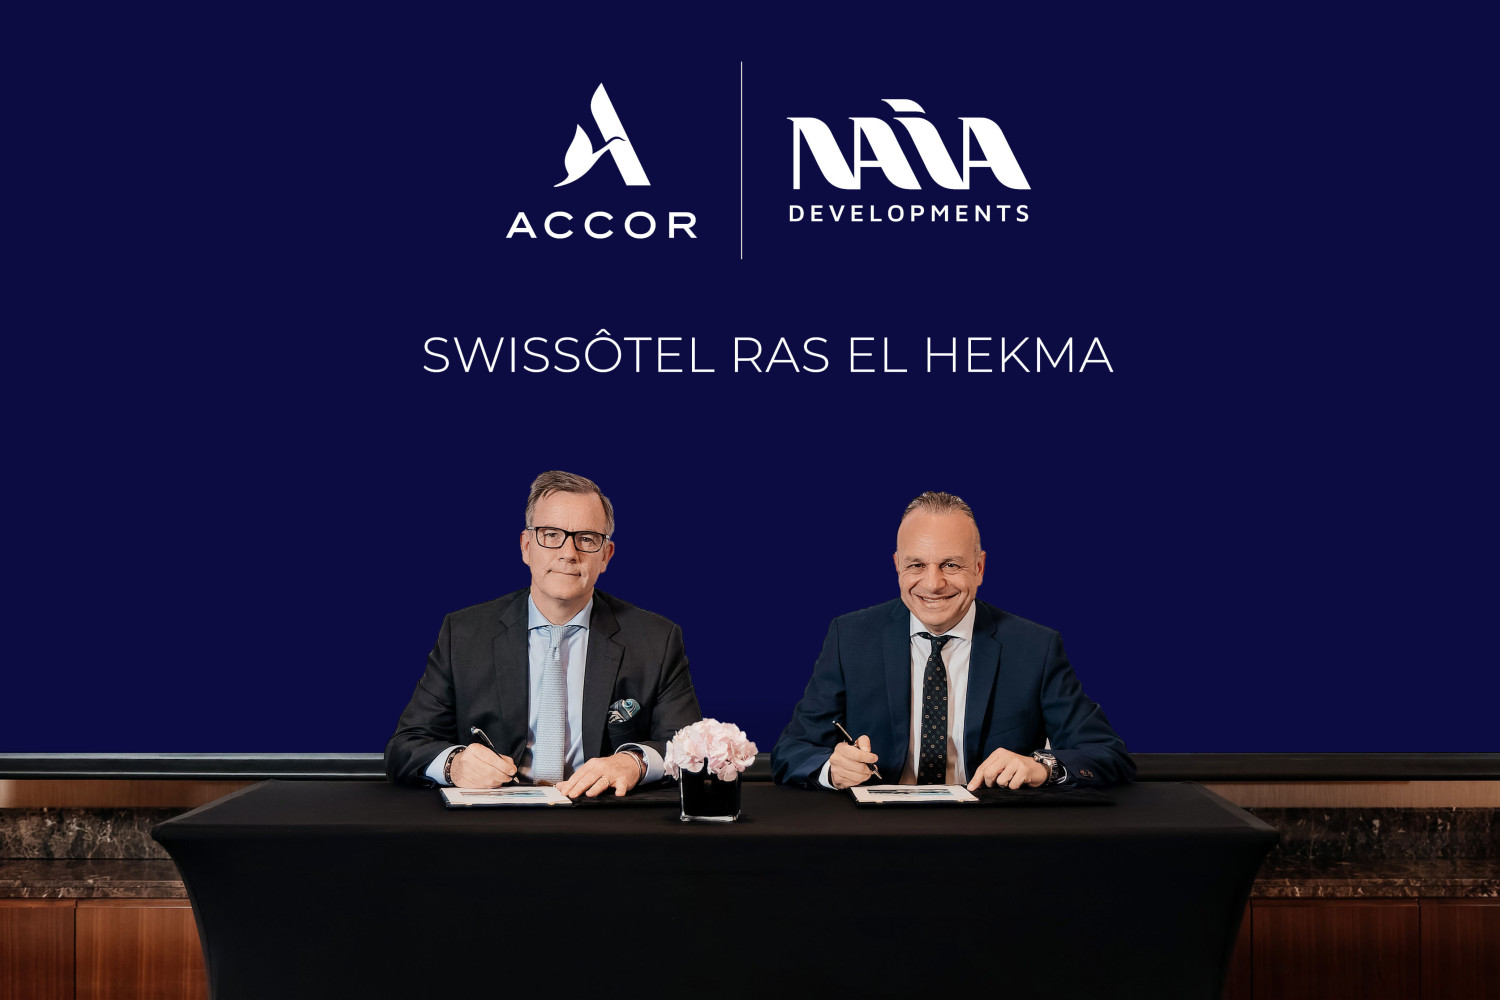 Accor Signs Deal with Naia Developments for Swissôtel in Ras El Hekma